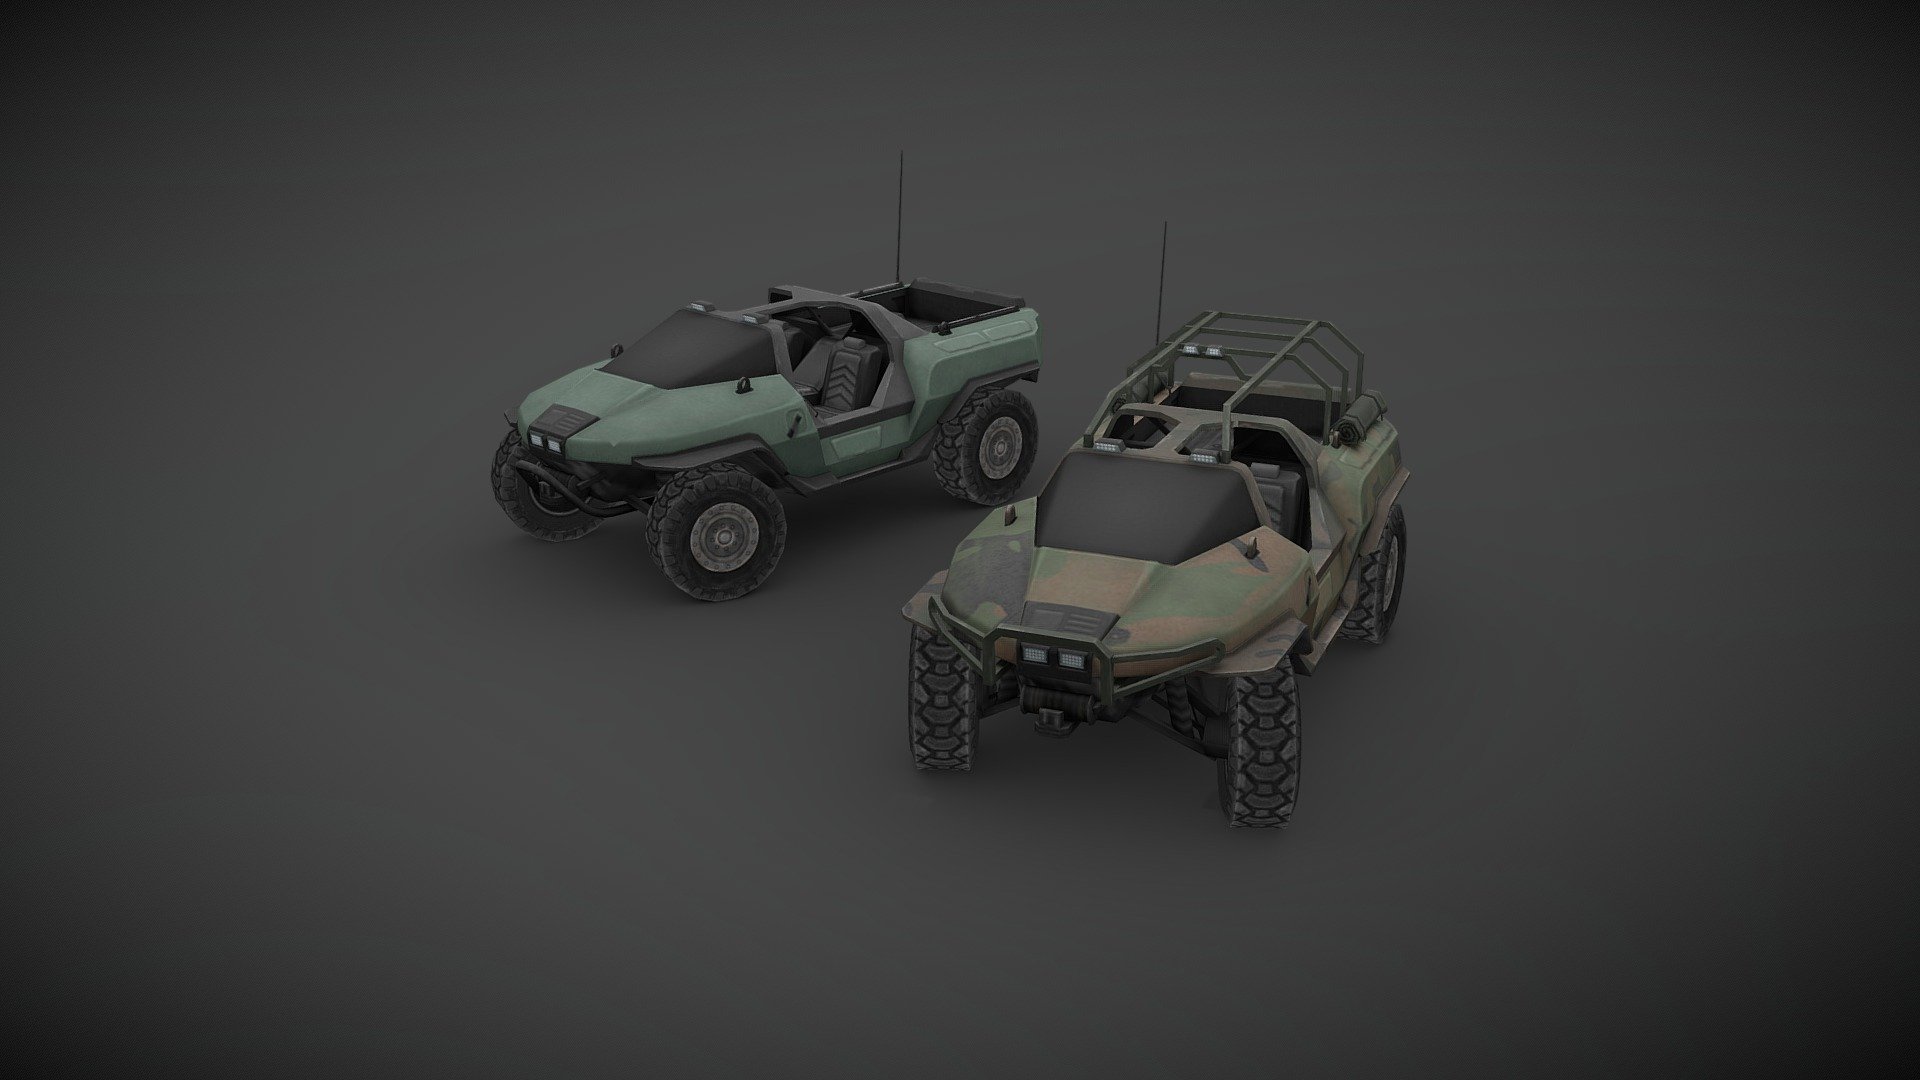 Halo M12-C Hog, civilian variant of the M12 based on community artwork with some of my own ideas. These models were made for Project Zomboid, low poly but with a high detail textures, optimized for game engine. This version is not a 100% true to the original since there are some compromises I’ve had to make to present it here.

You can find the actual version in project ZOMBOID STEAM Workshop 3d model